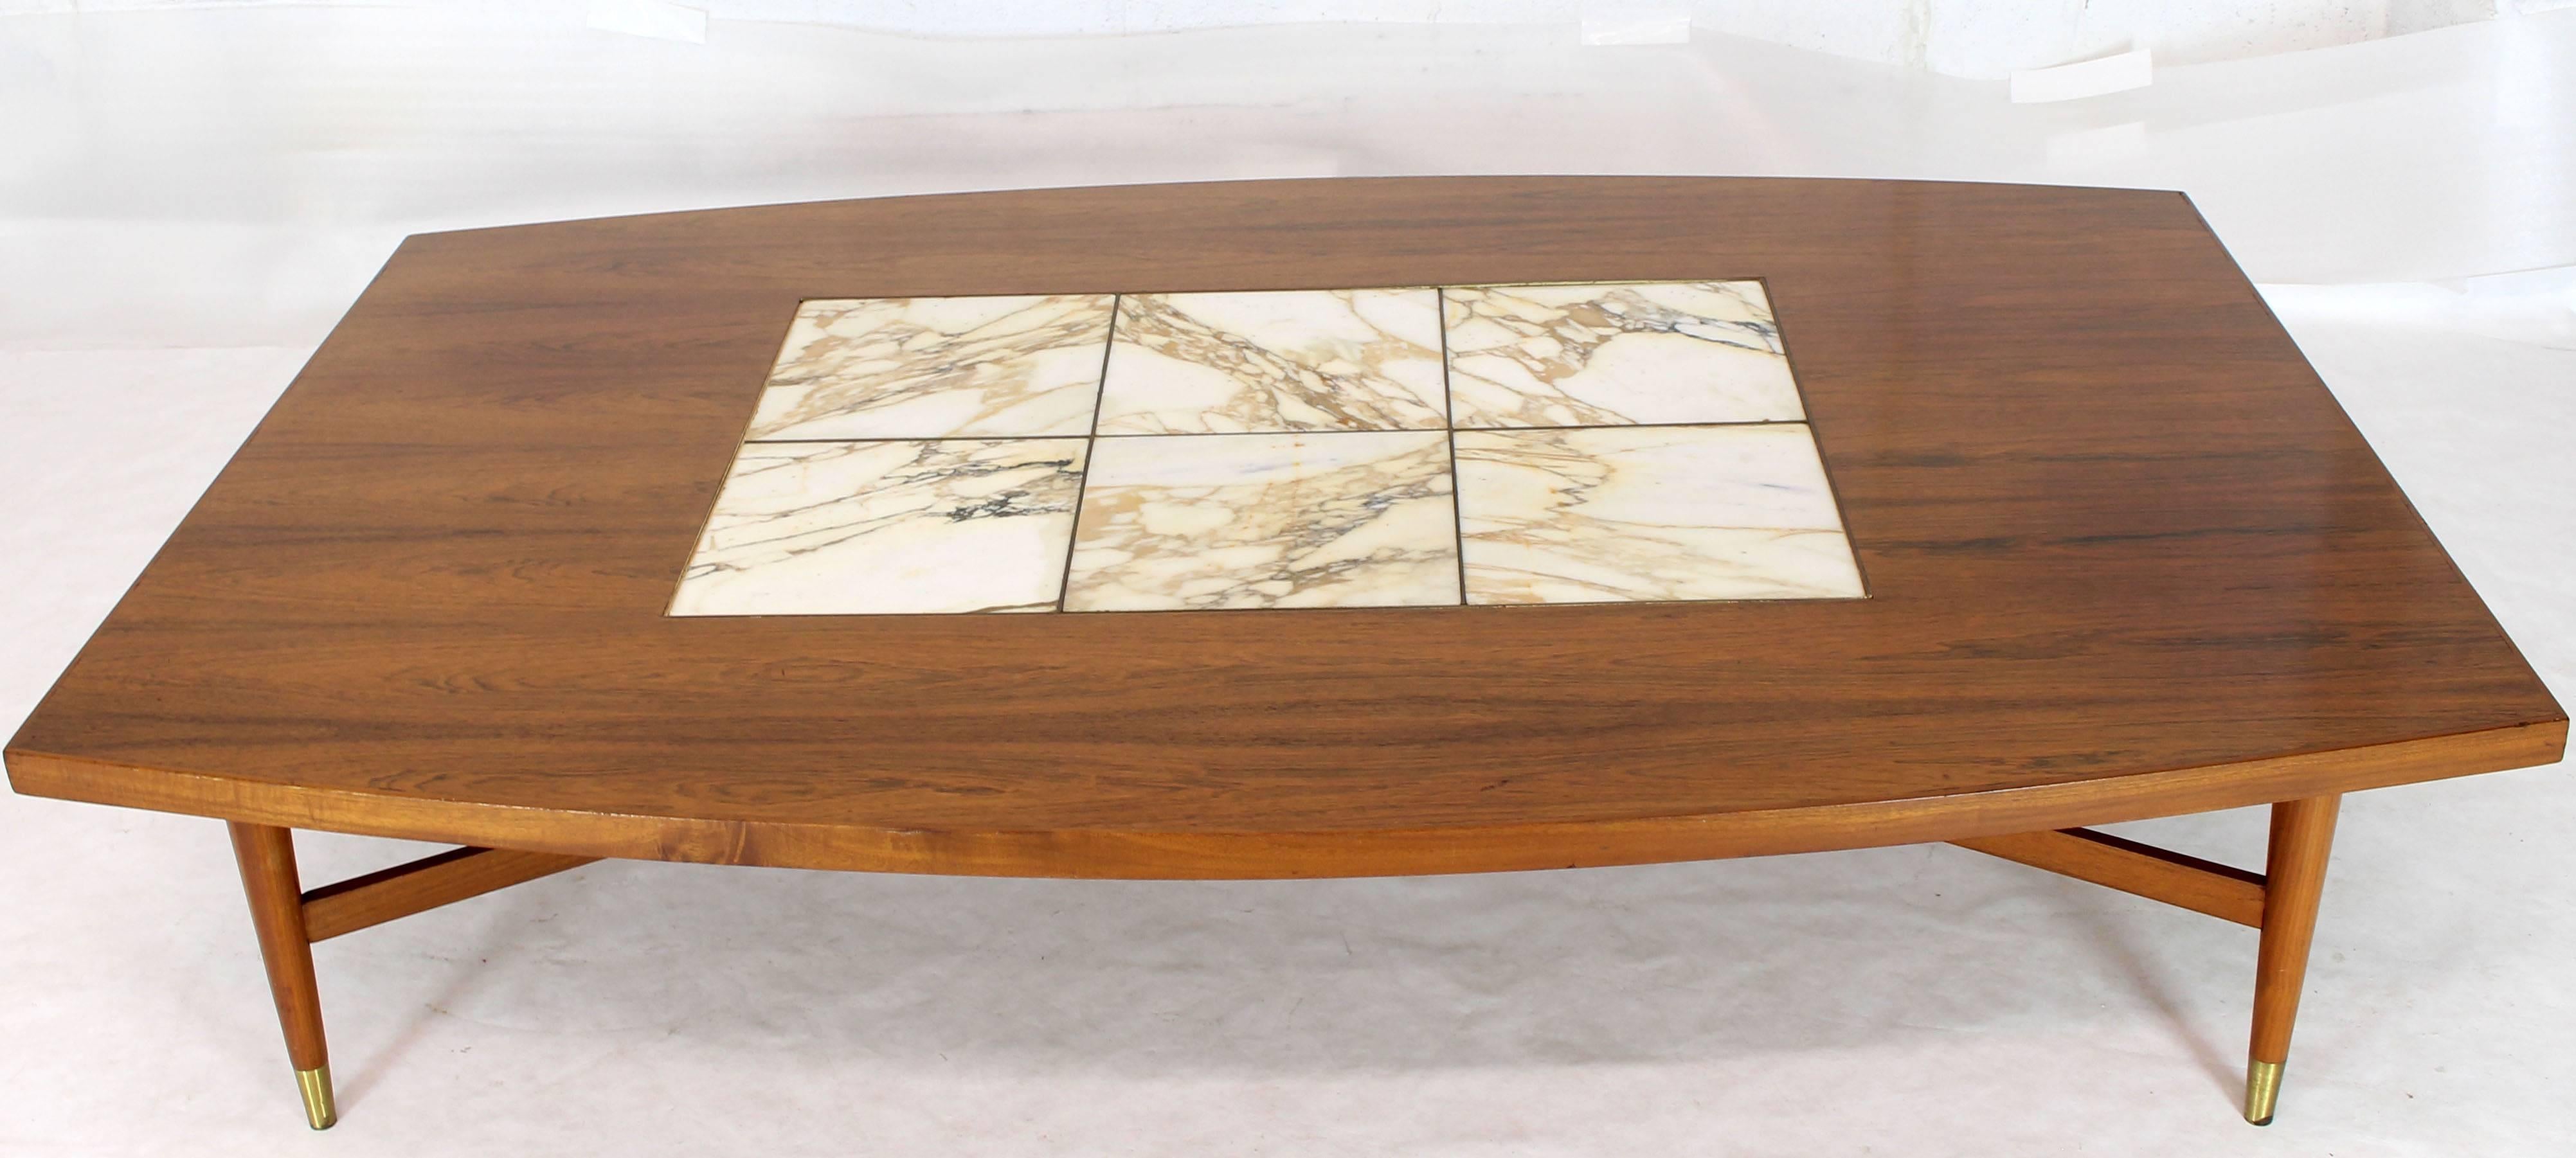 American Large Oversize Boat Shape Rosewood & Walnut Coffee Table Brass Inlay Marble Tile For Sale